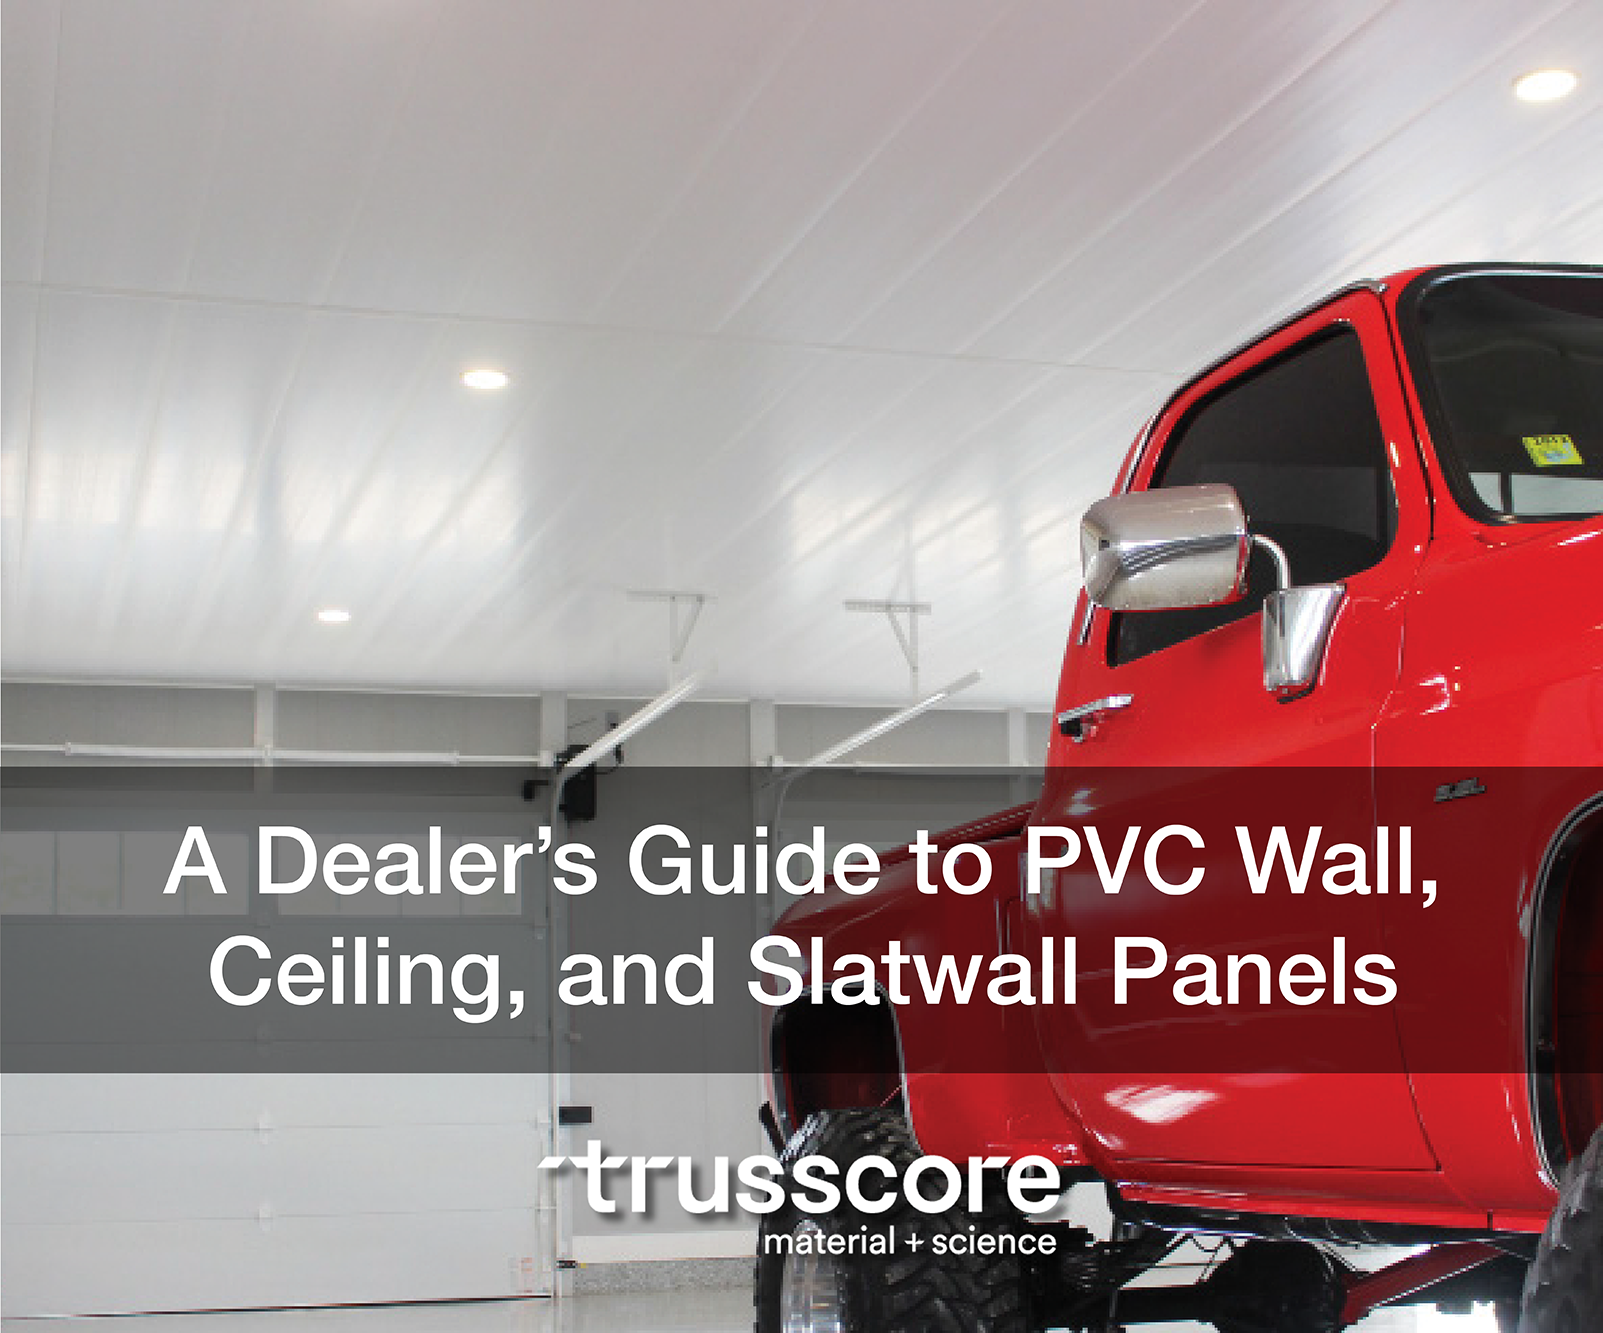 A Dealer’s Guide to PVC Wall, Ceiling, and Slatwall Panels